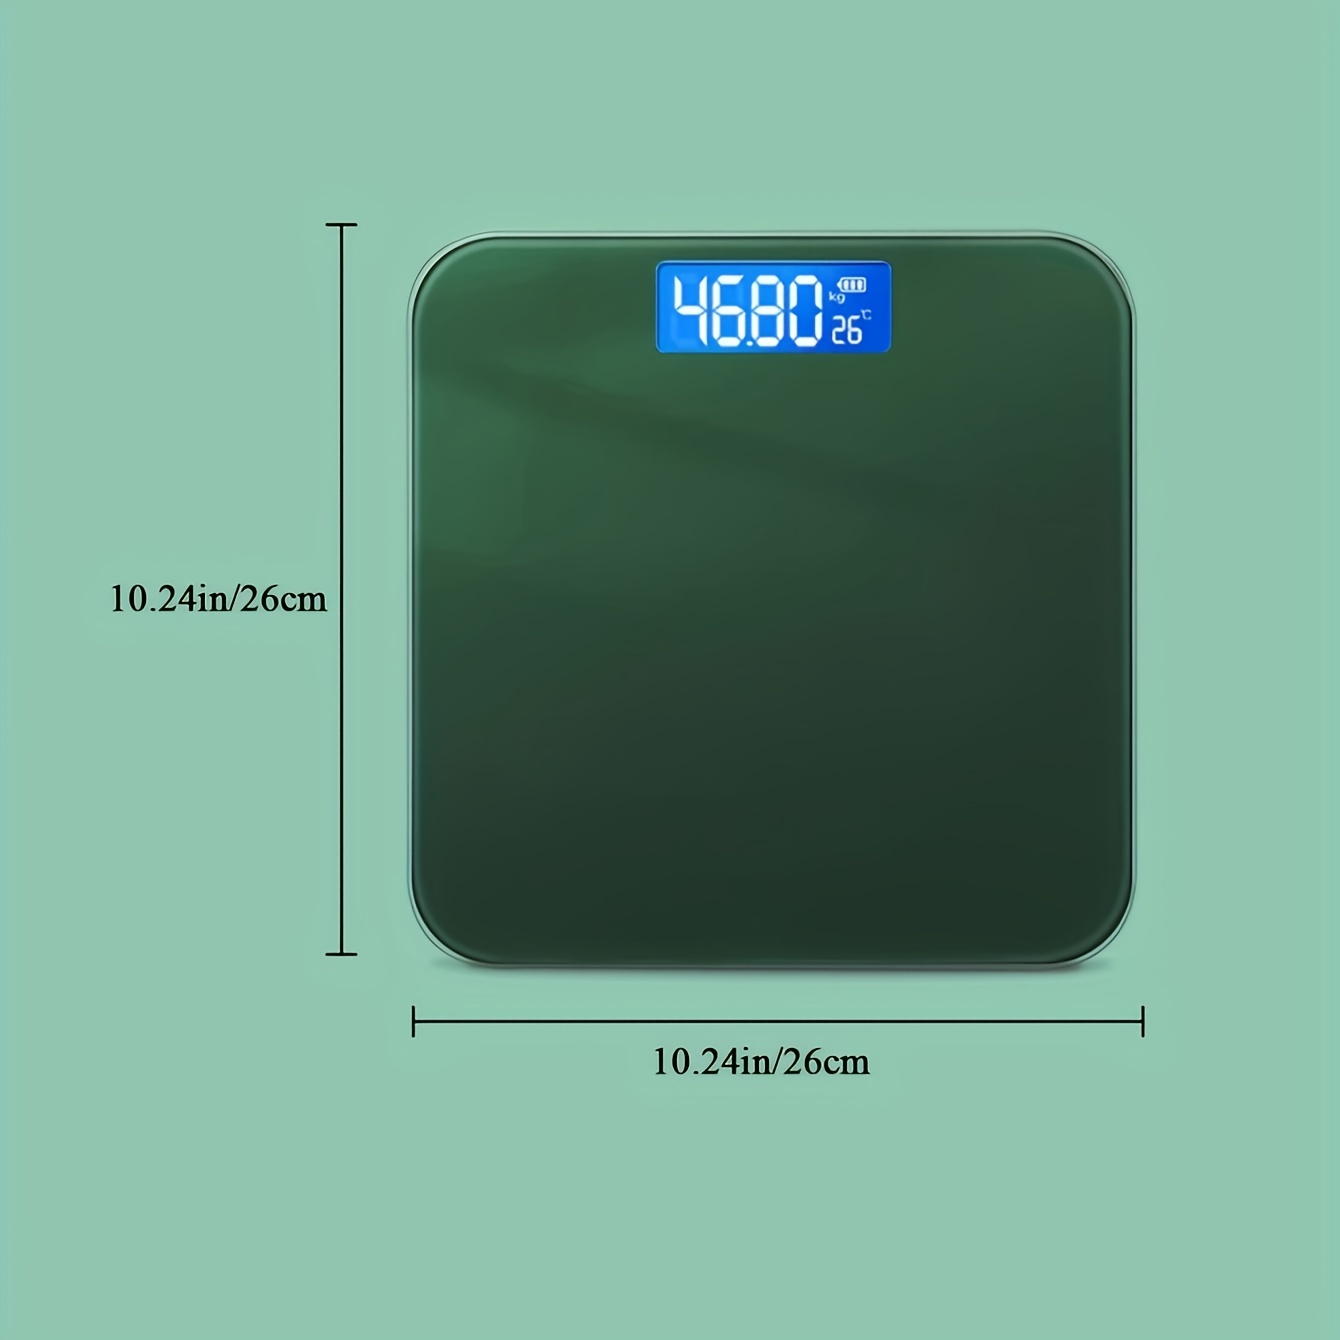 Save $115 on This Inbody Digital Scale at Wellbots With This